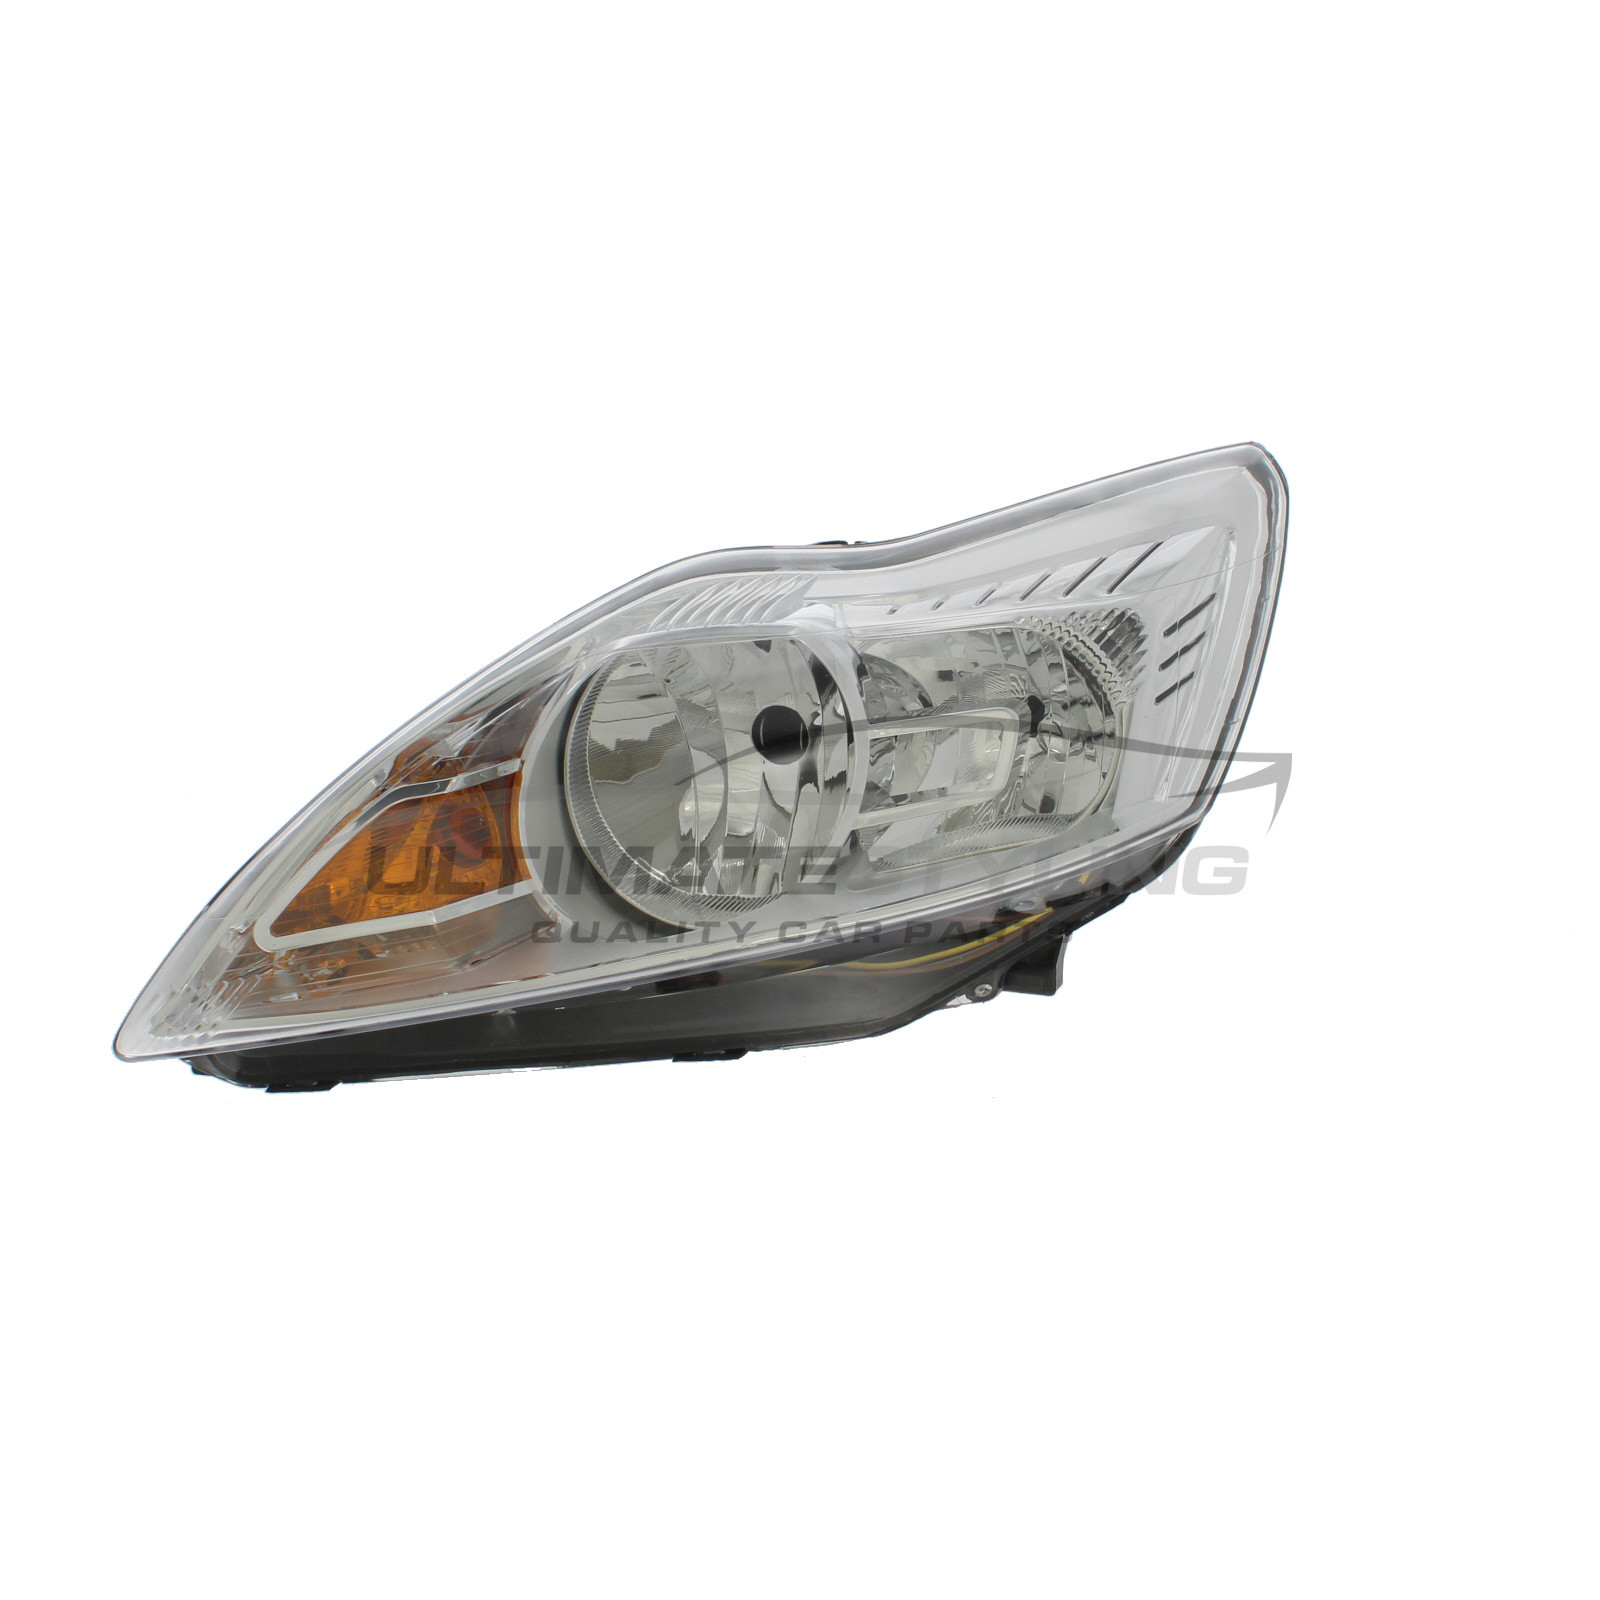 Ford Focus 2008-2011 Halogen, Electric With Motor, Chrome Headlight / Headlamp Passengers Side (LH)